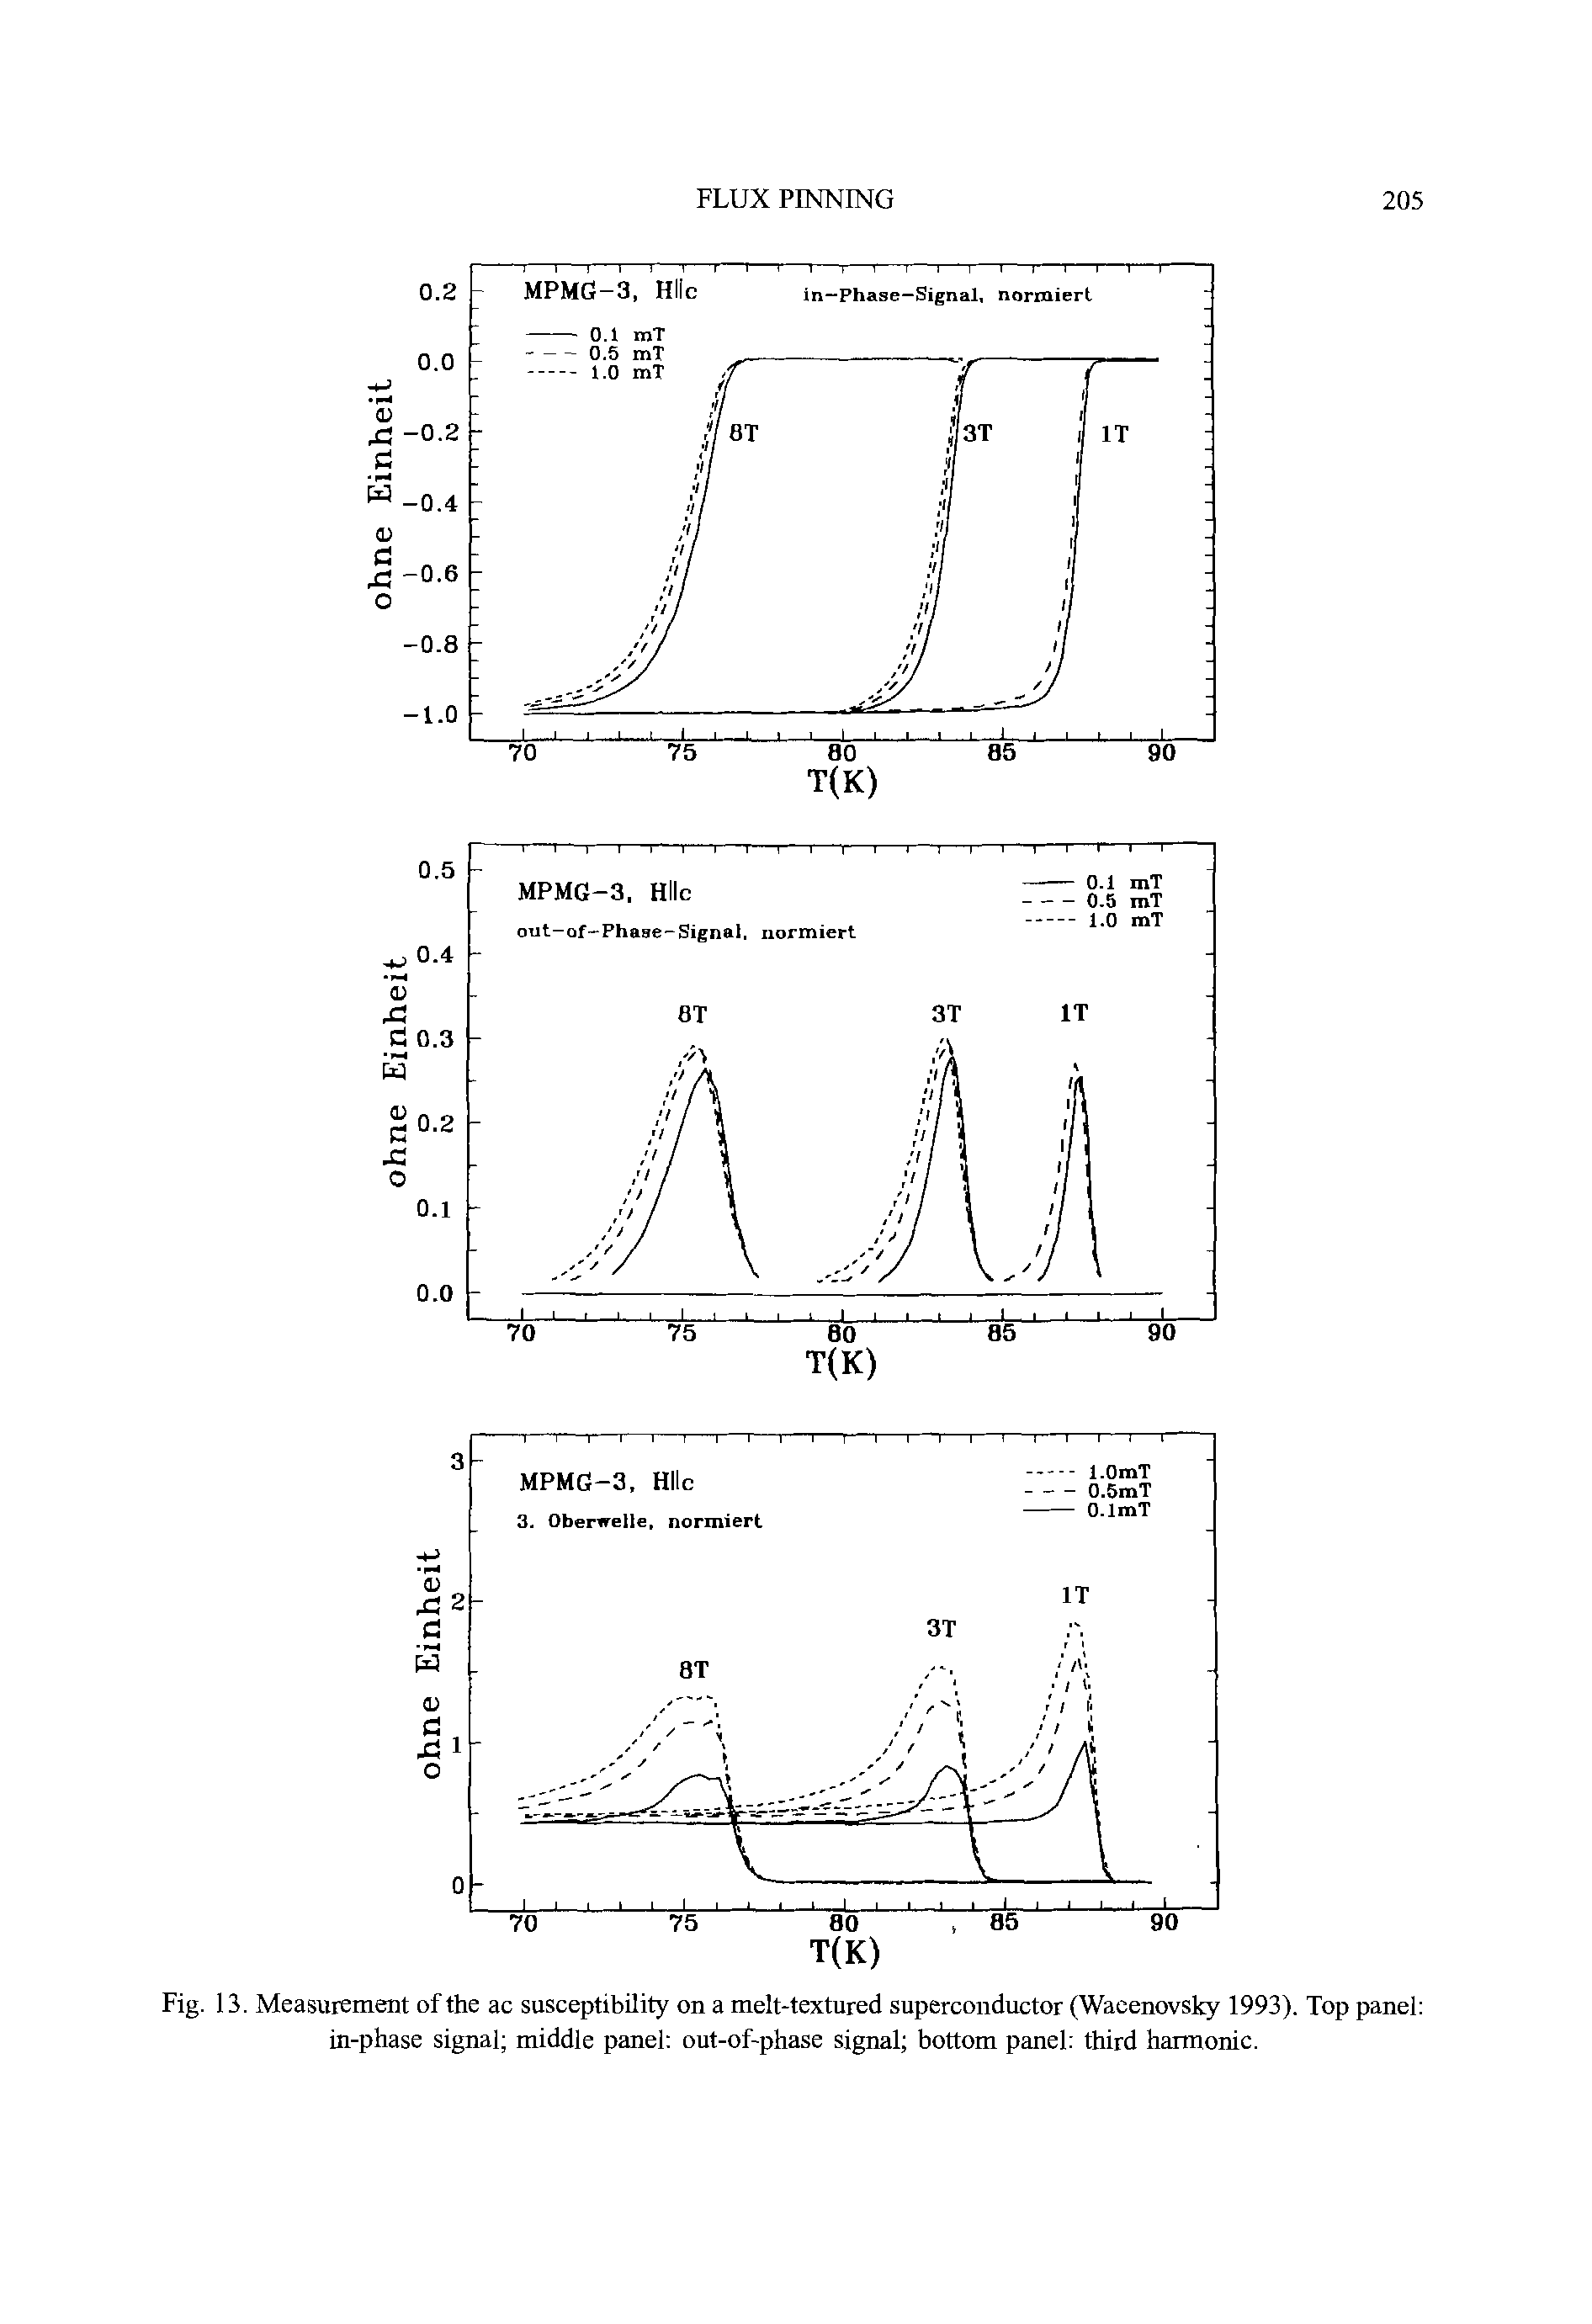 Fig. 13. Measiirement of the ac susceptibility on a melt-textured superconductor (Wacenovsky 1993). Top panel in-phase signal middle panel out-of-phase signal bottom panel third harmonic.